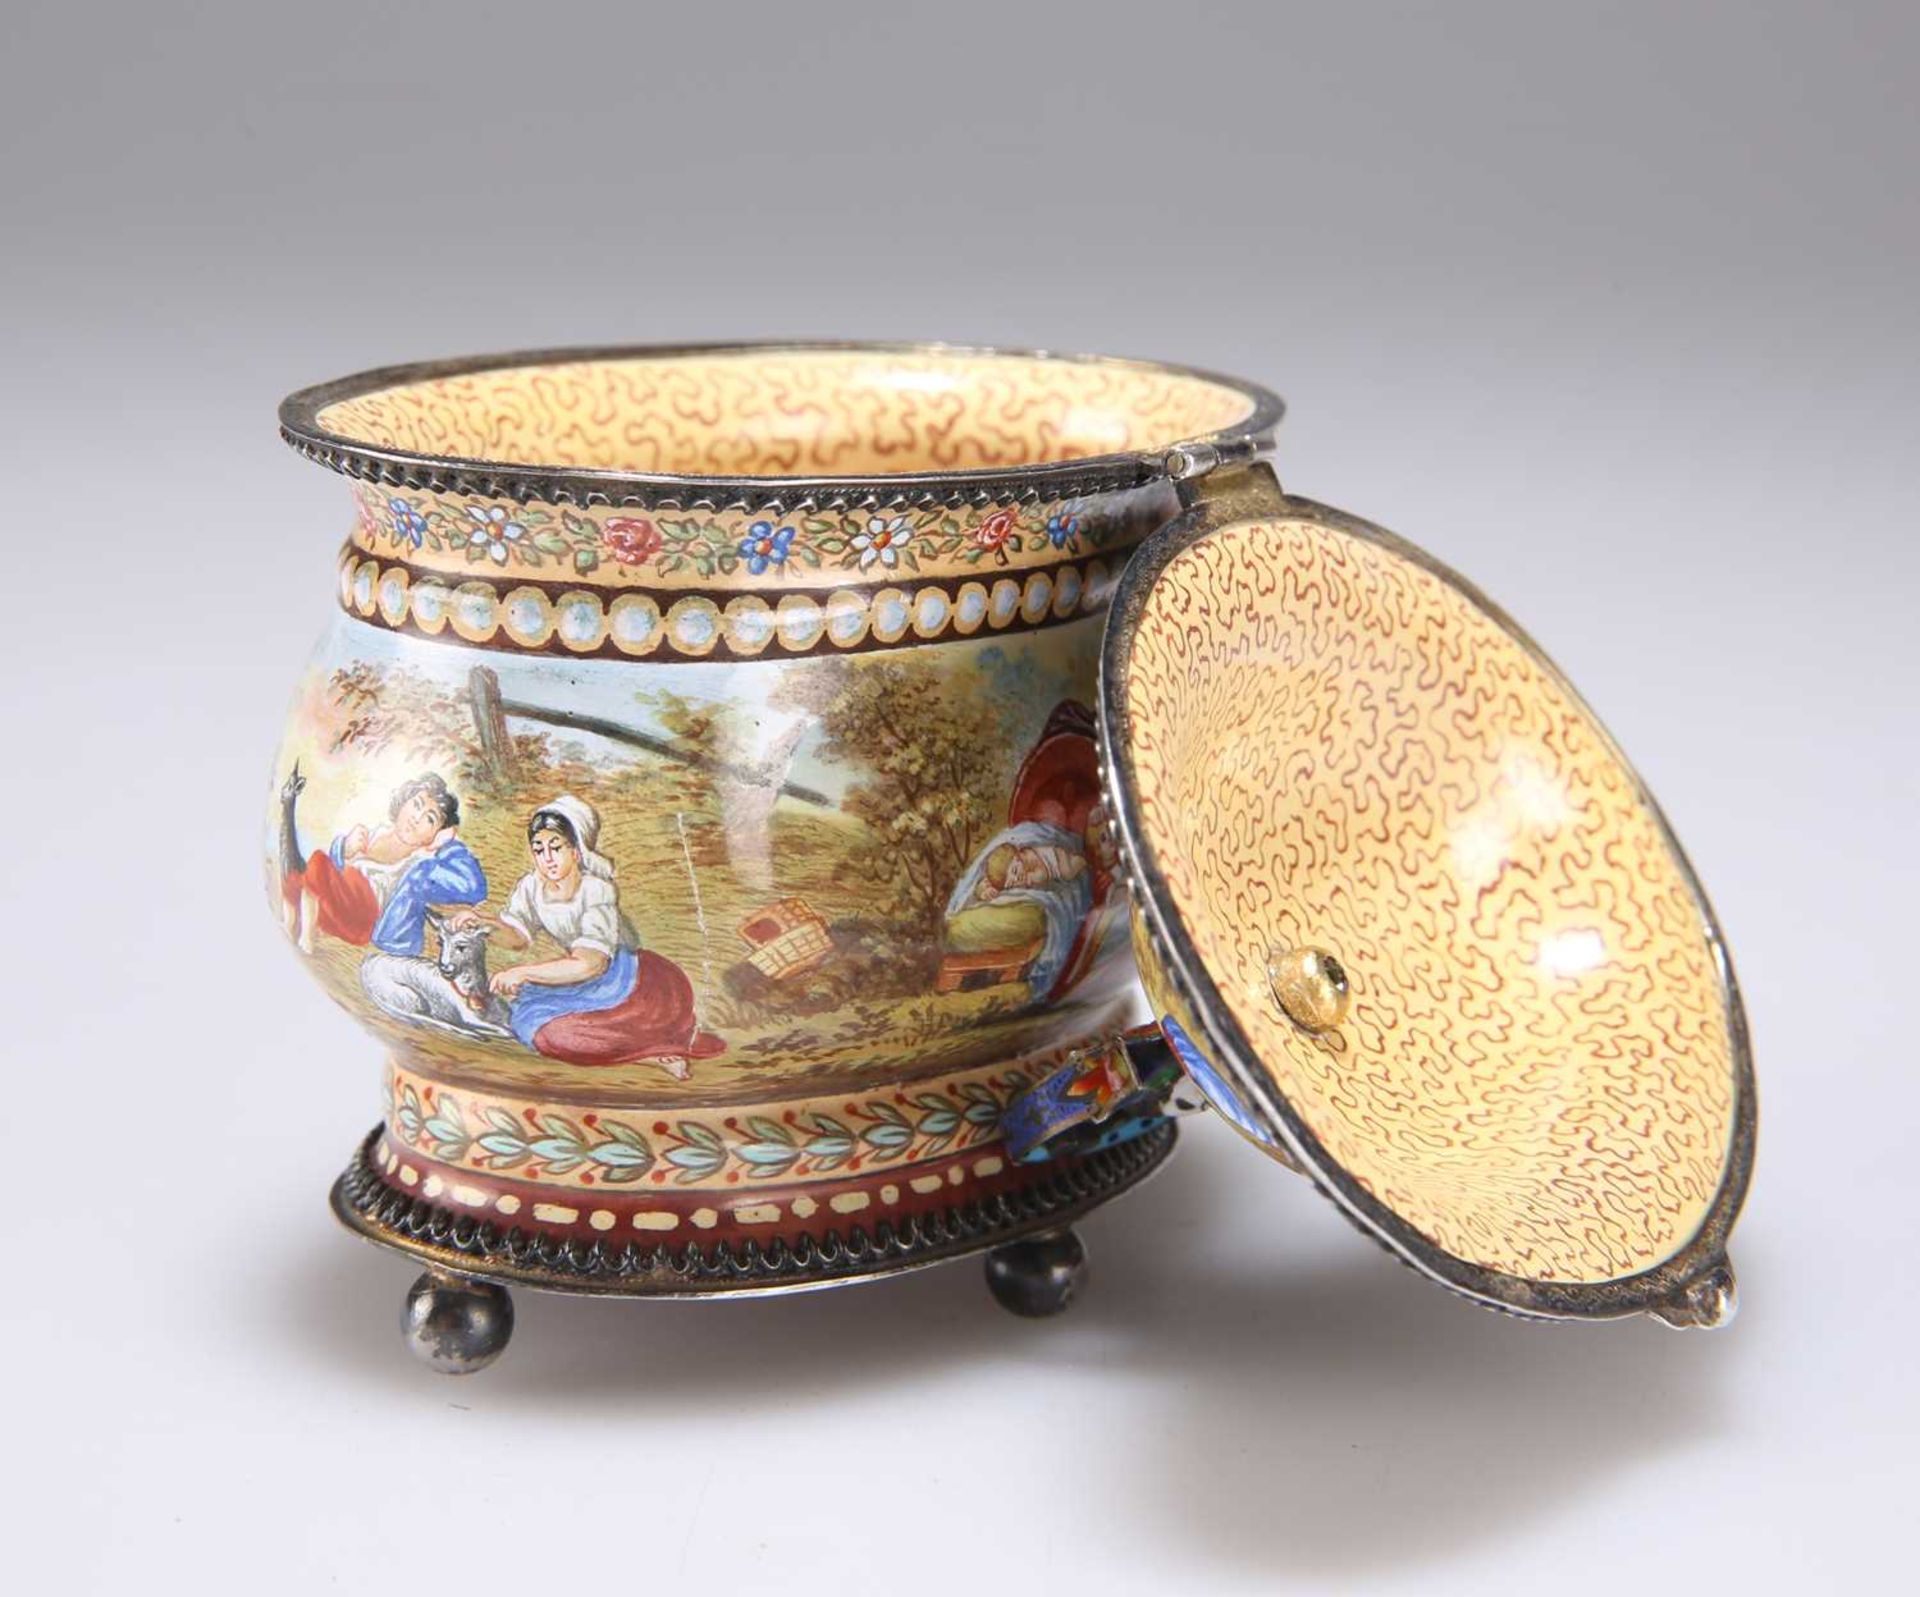 A VIENNESE ENAMEL BOX, LATE 19TH CENTURY - Image 2 of 5